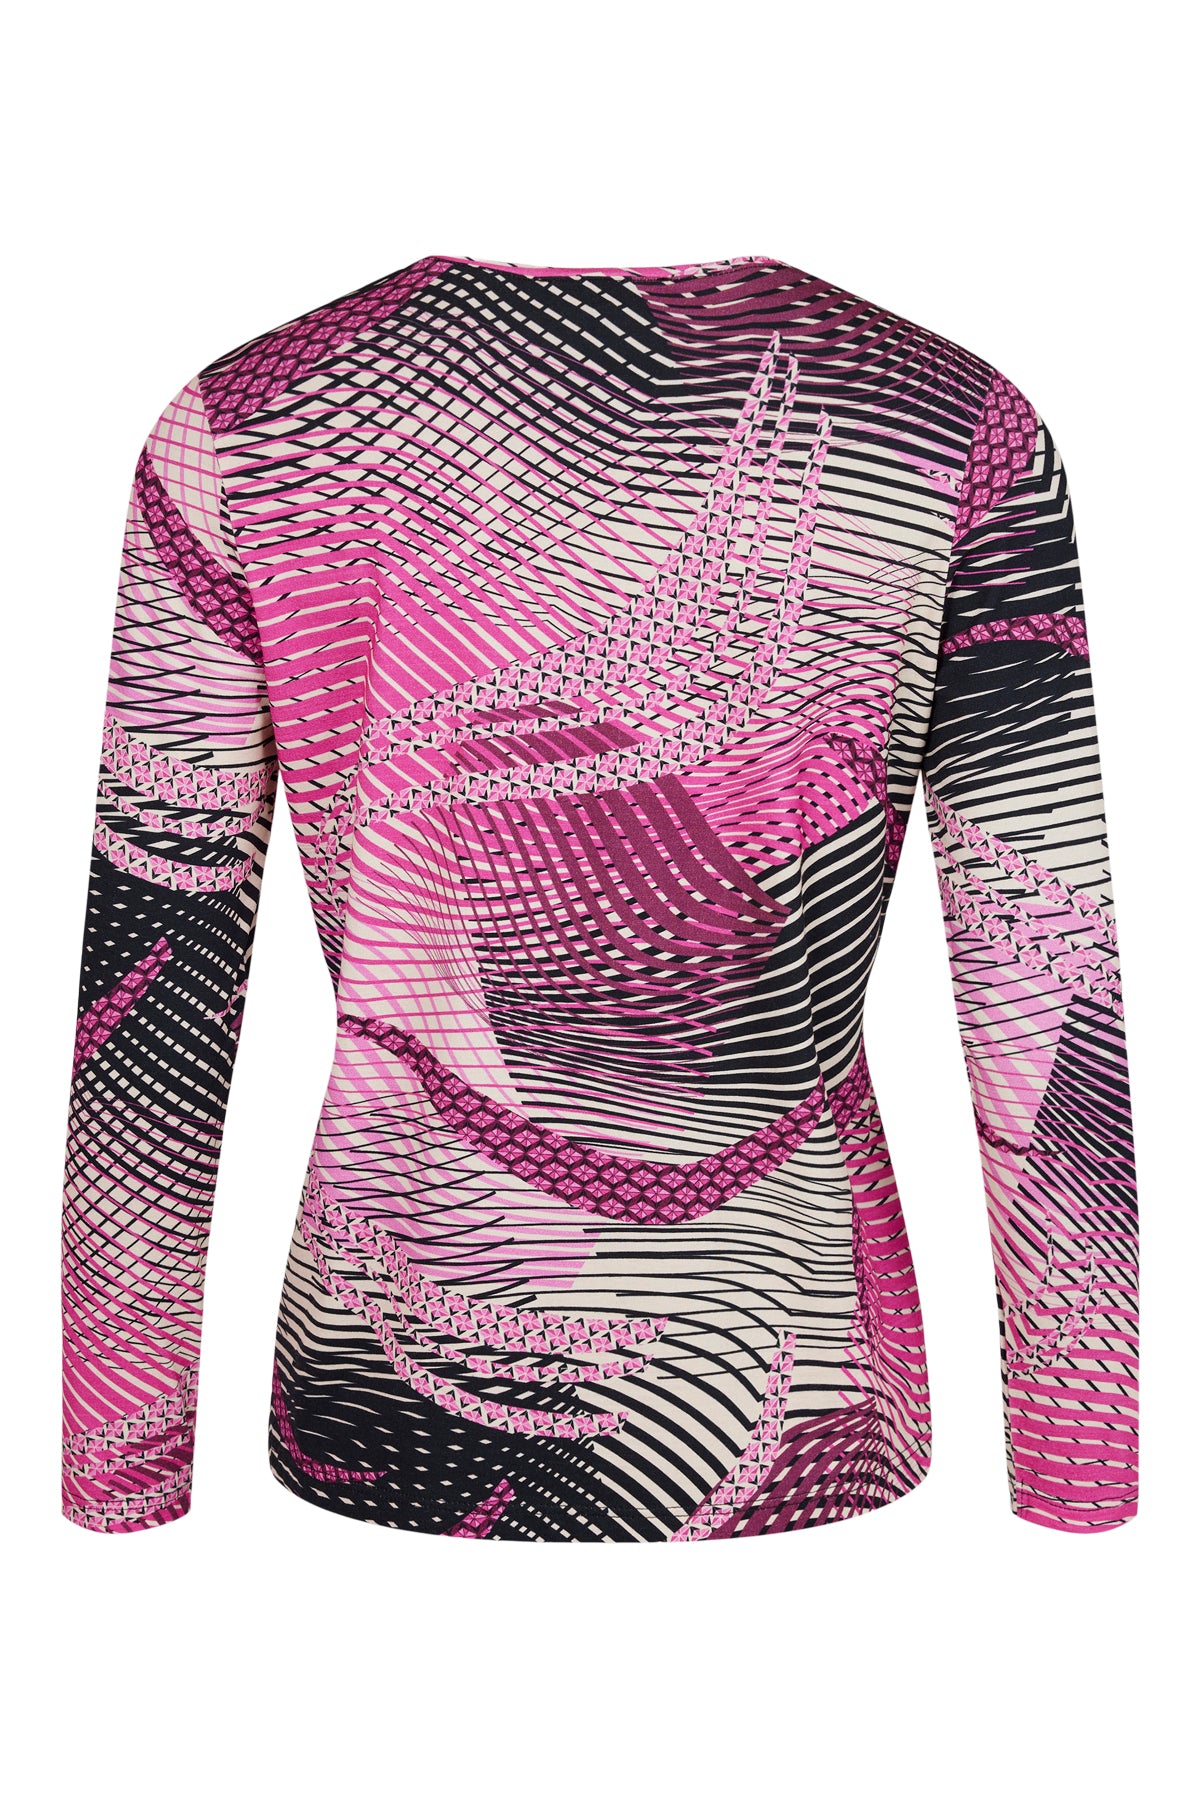 Sunday Pink and Black Swirl Effect Top